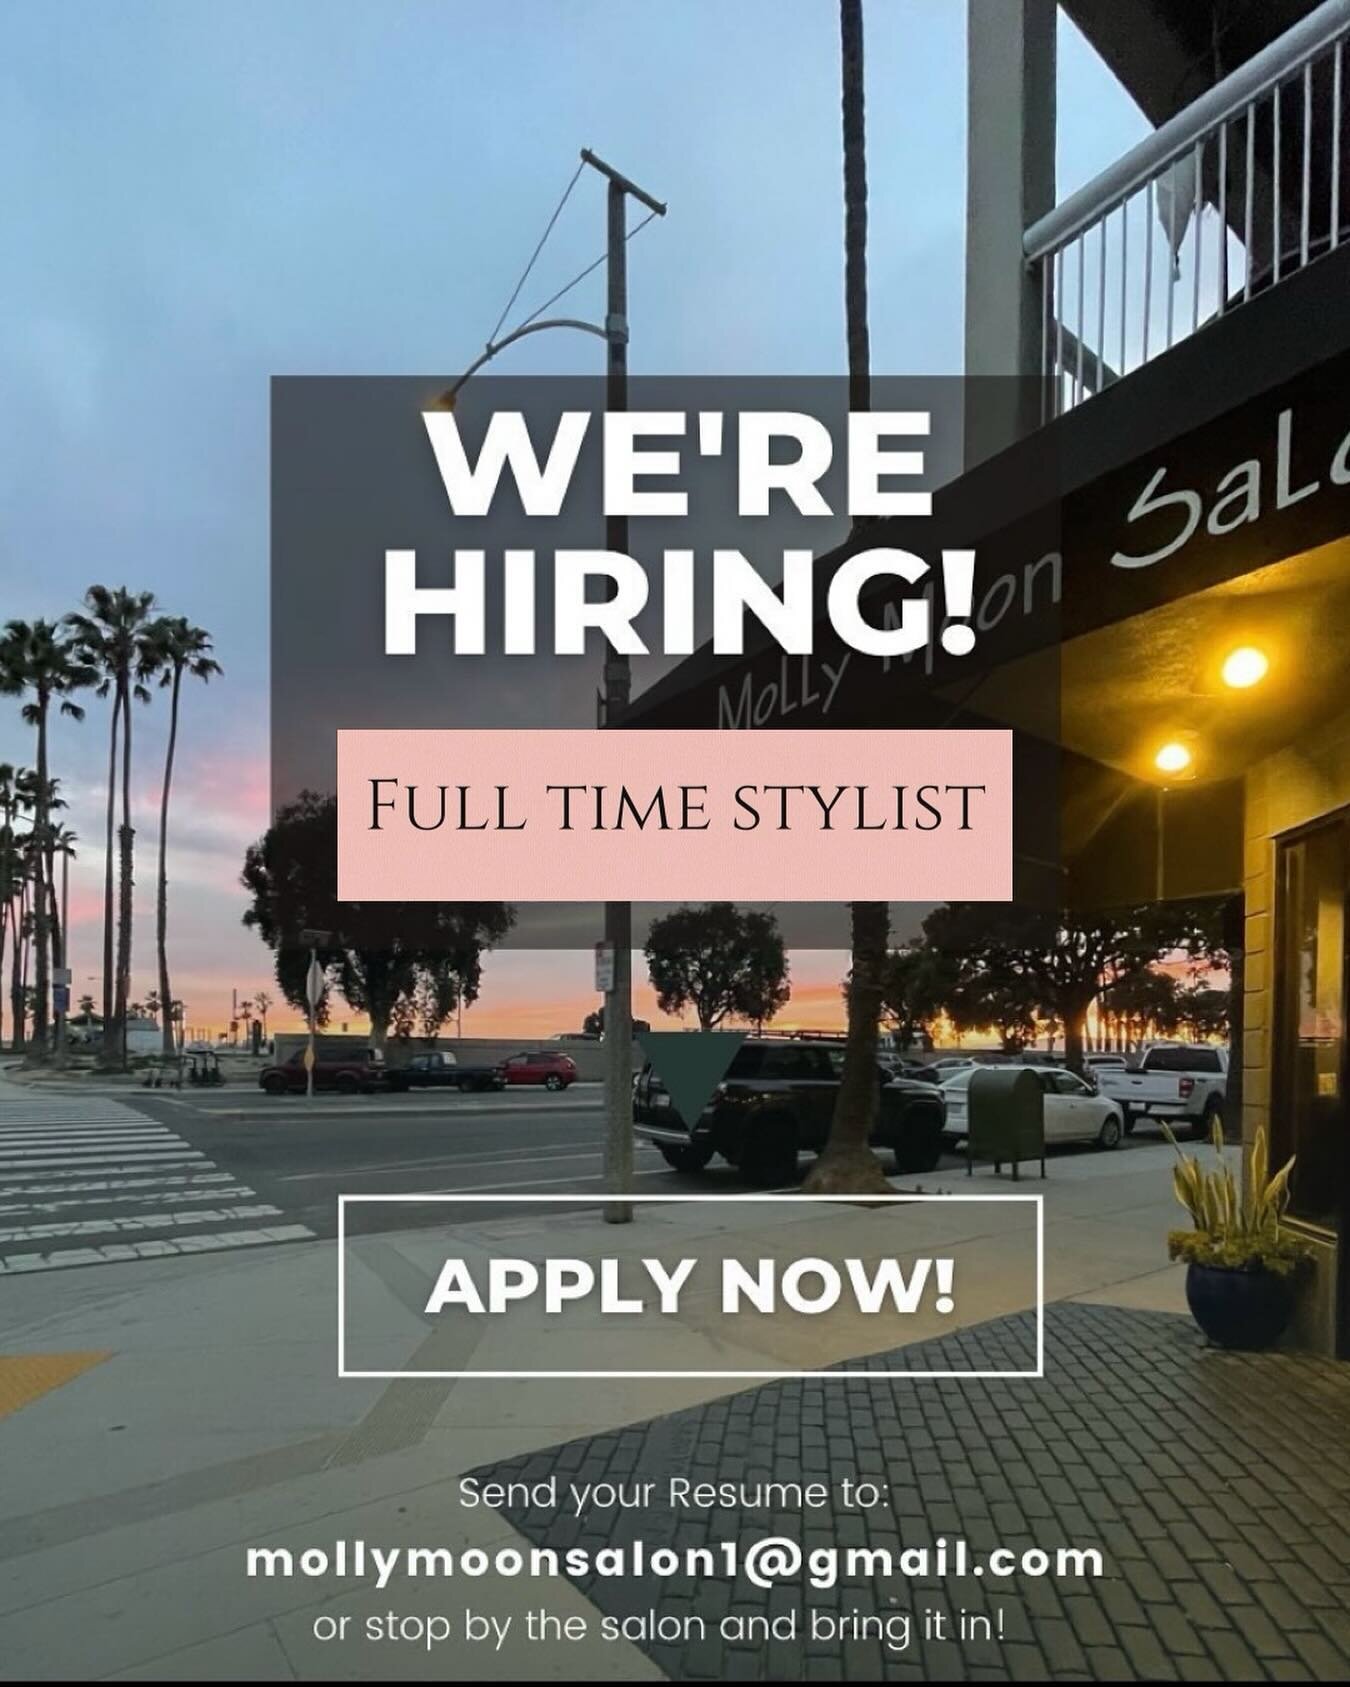 🚨We are hiring!!🚨
If you are interested in being part of the Molly Moon Salon team and working with a great group of professionals send over your resume to mollymoonsalon1@gmail.com and we will get in contact with you.